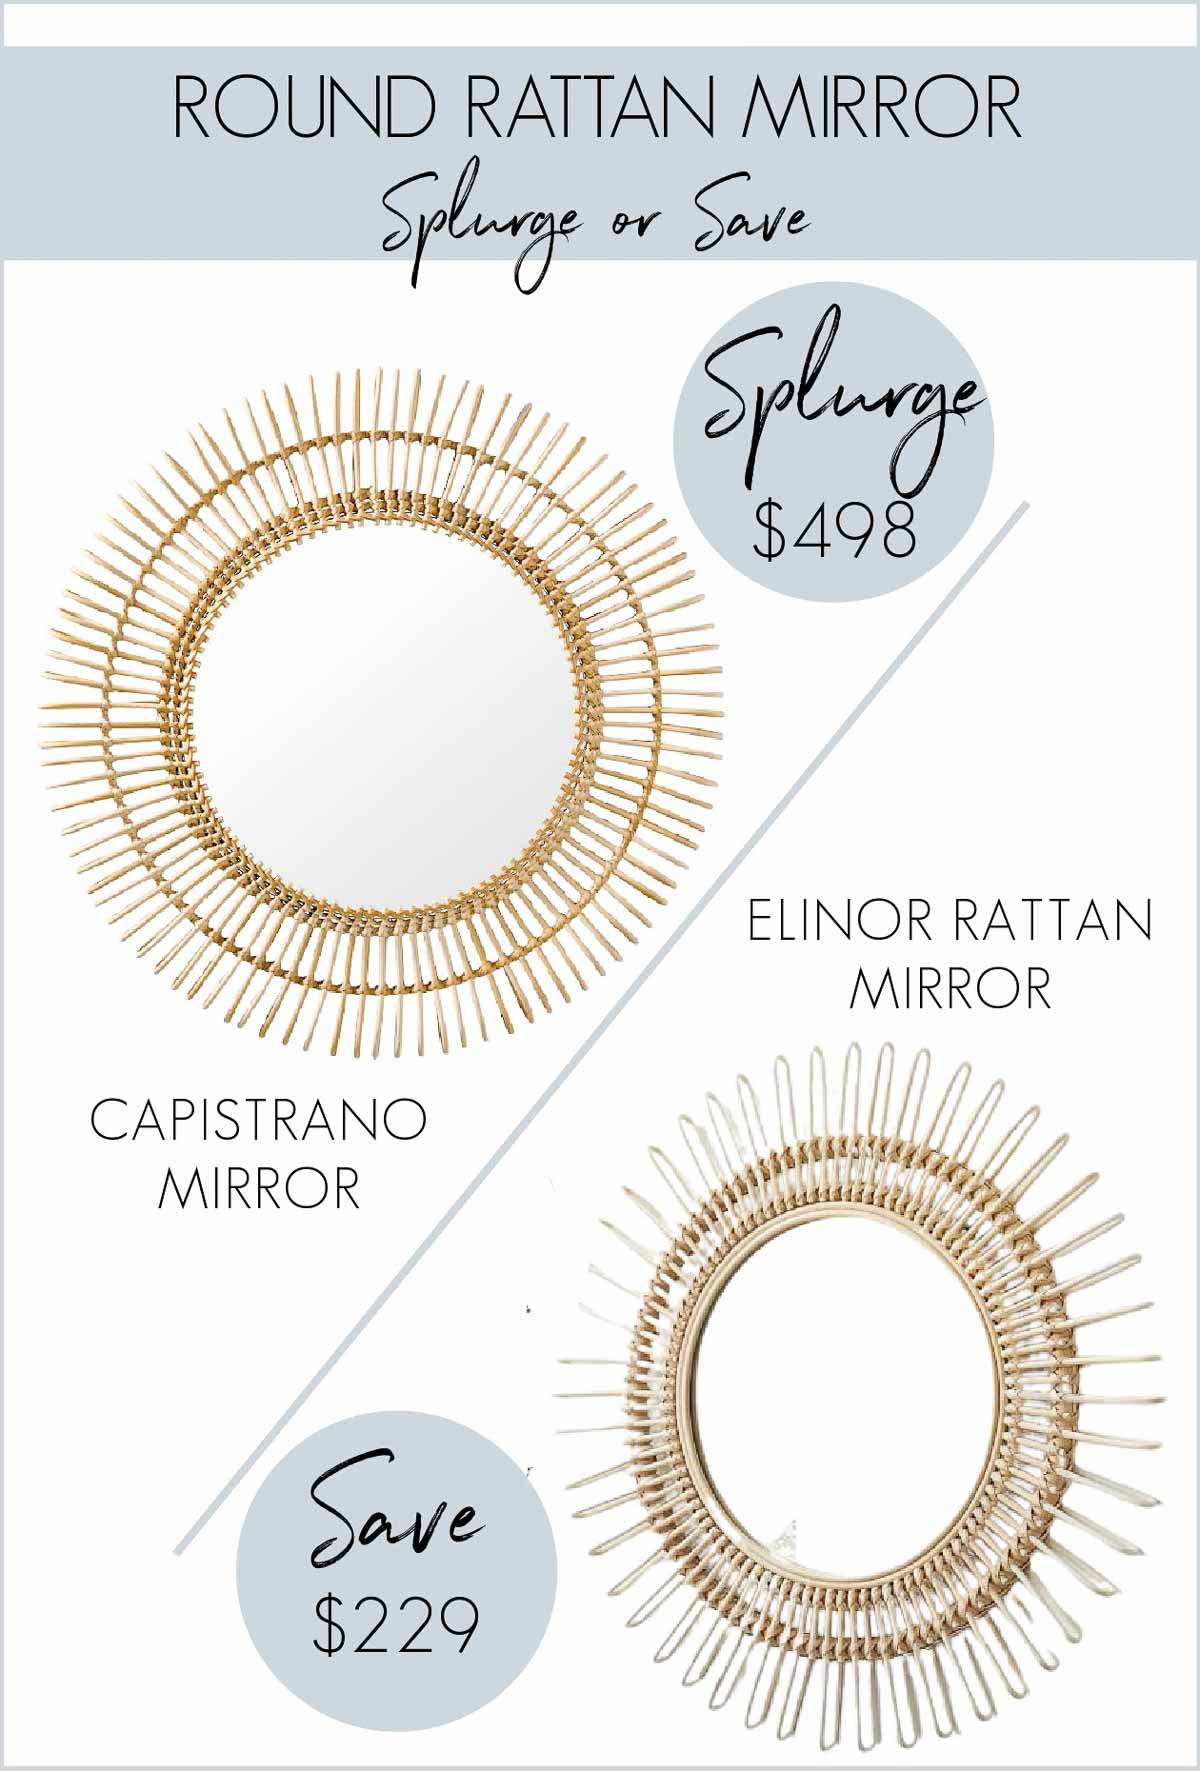 Rattan mirror look for less - a favorite cheap home decor find!